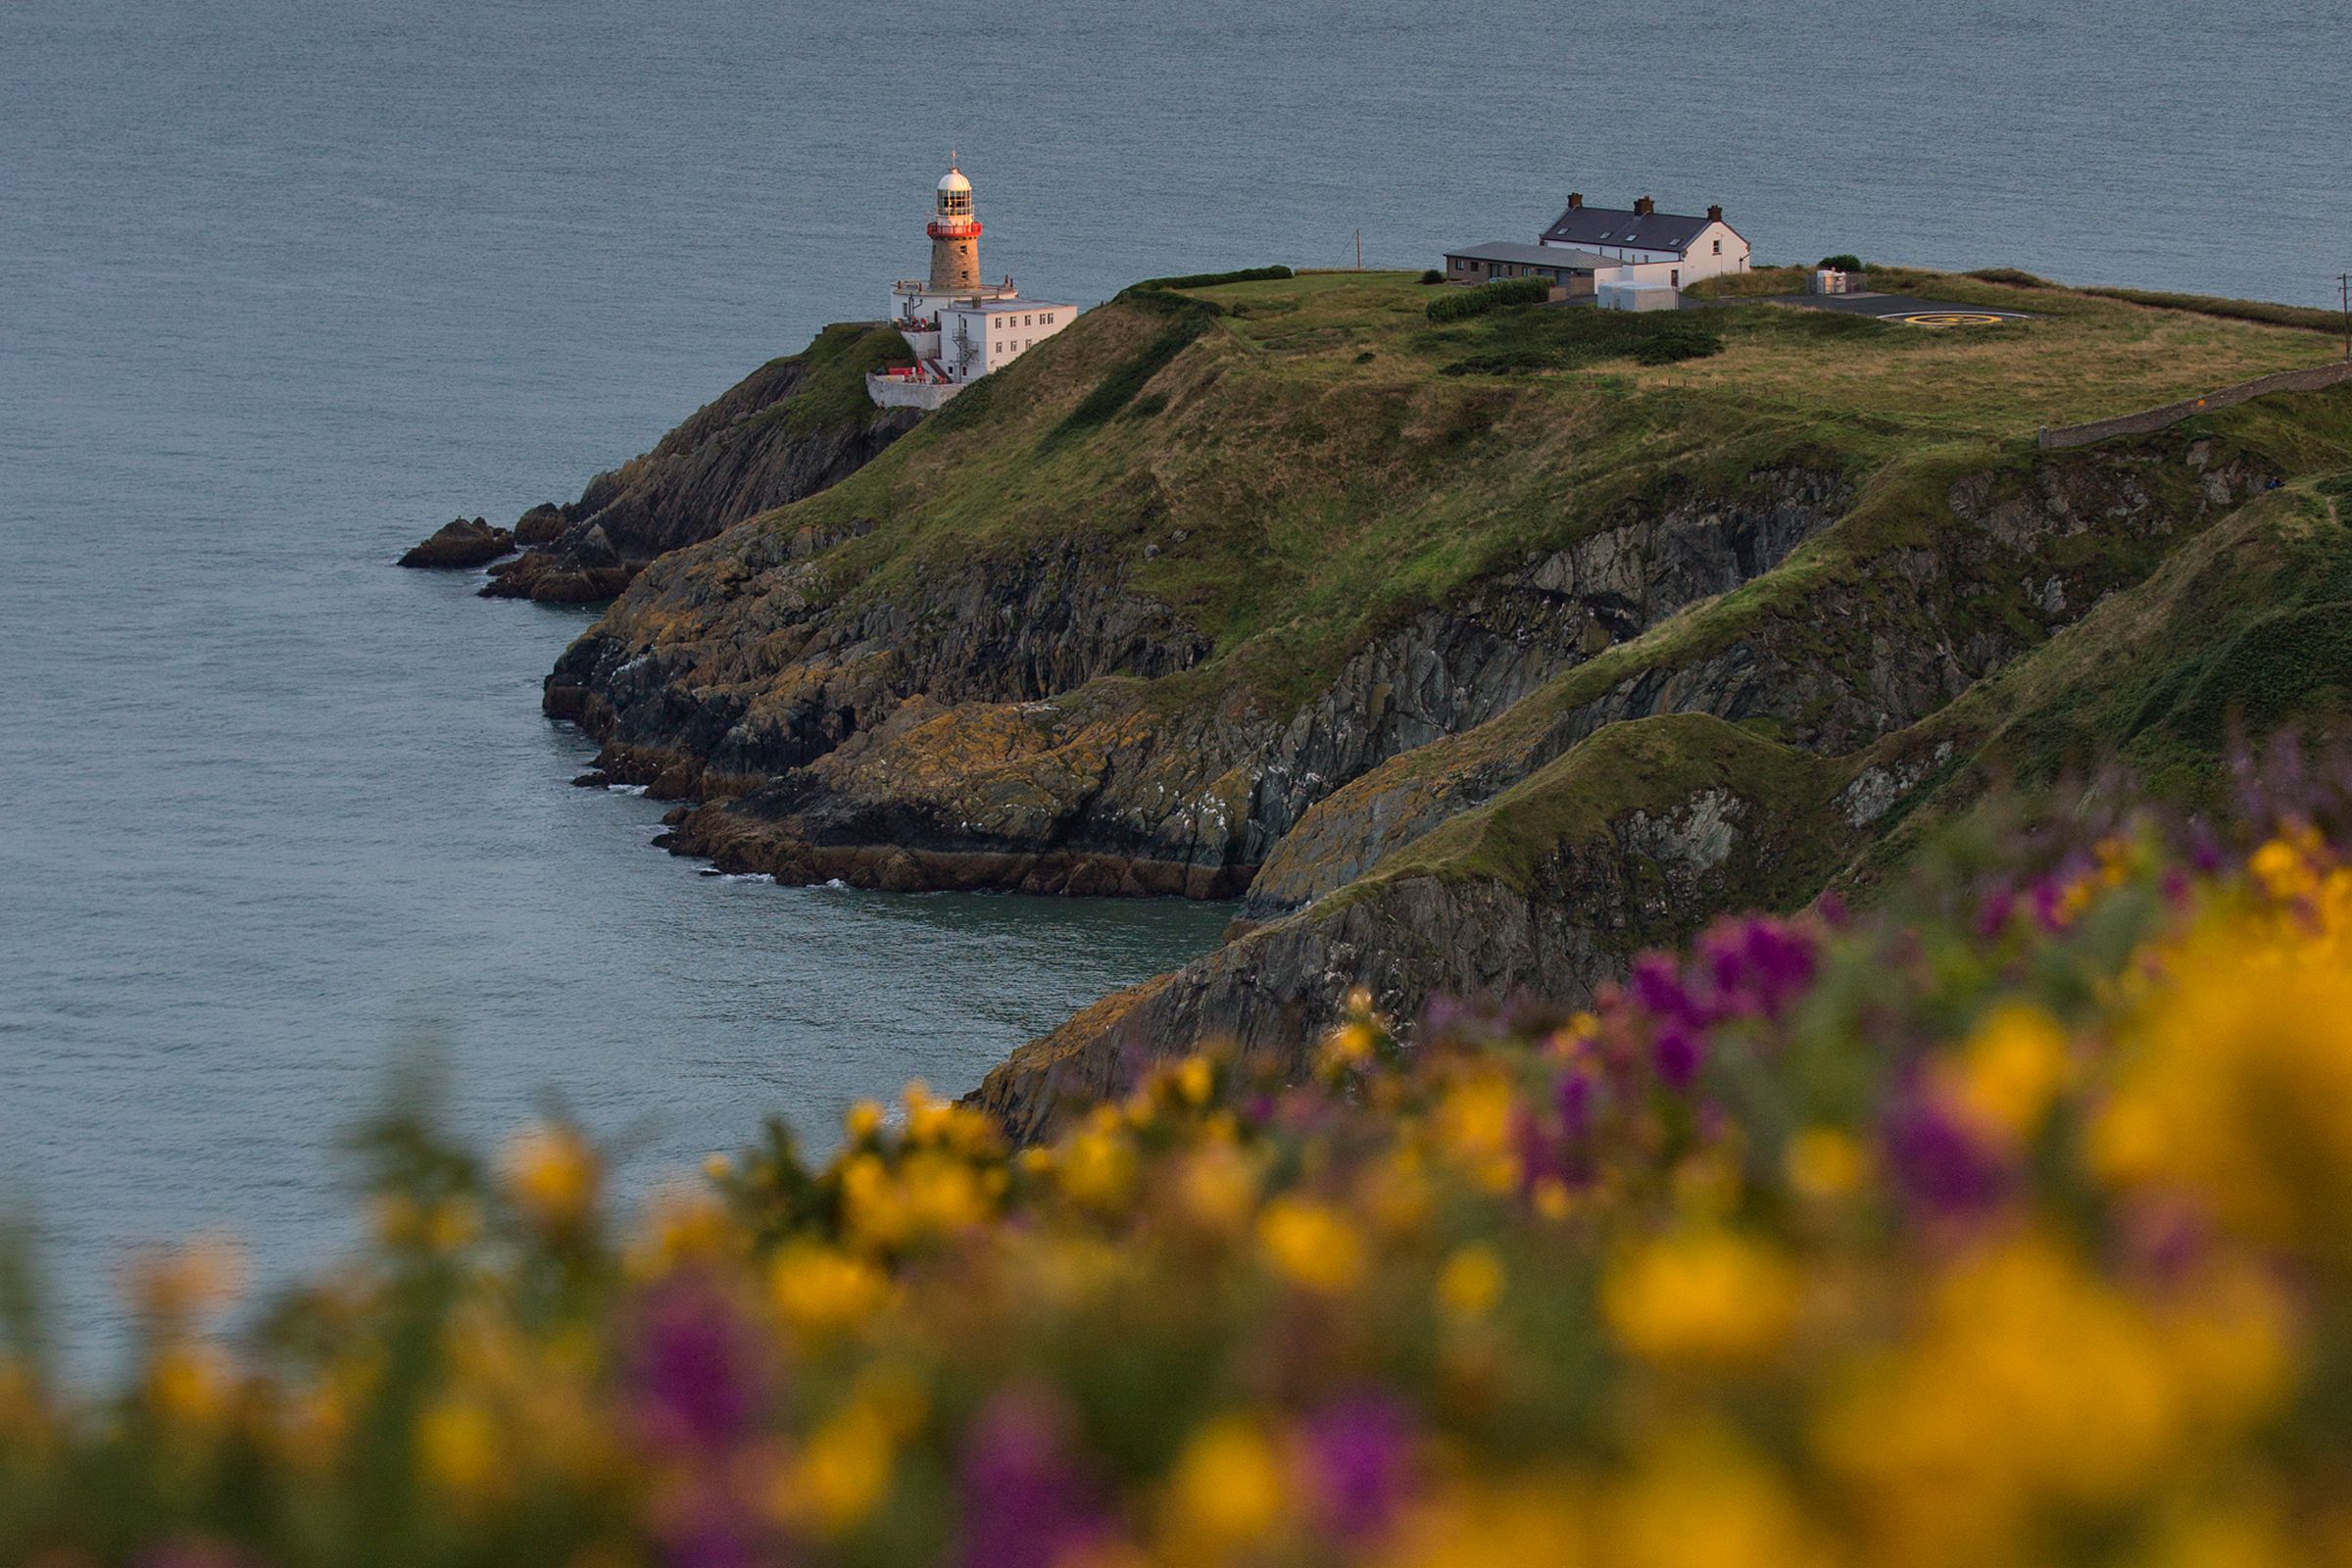 Image of a small house and the lighthouse at Howth Head, Dublin